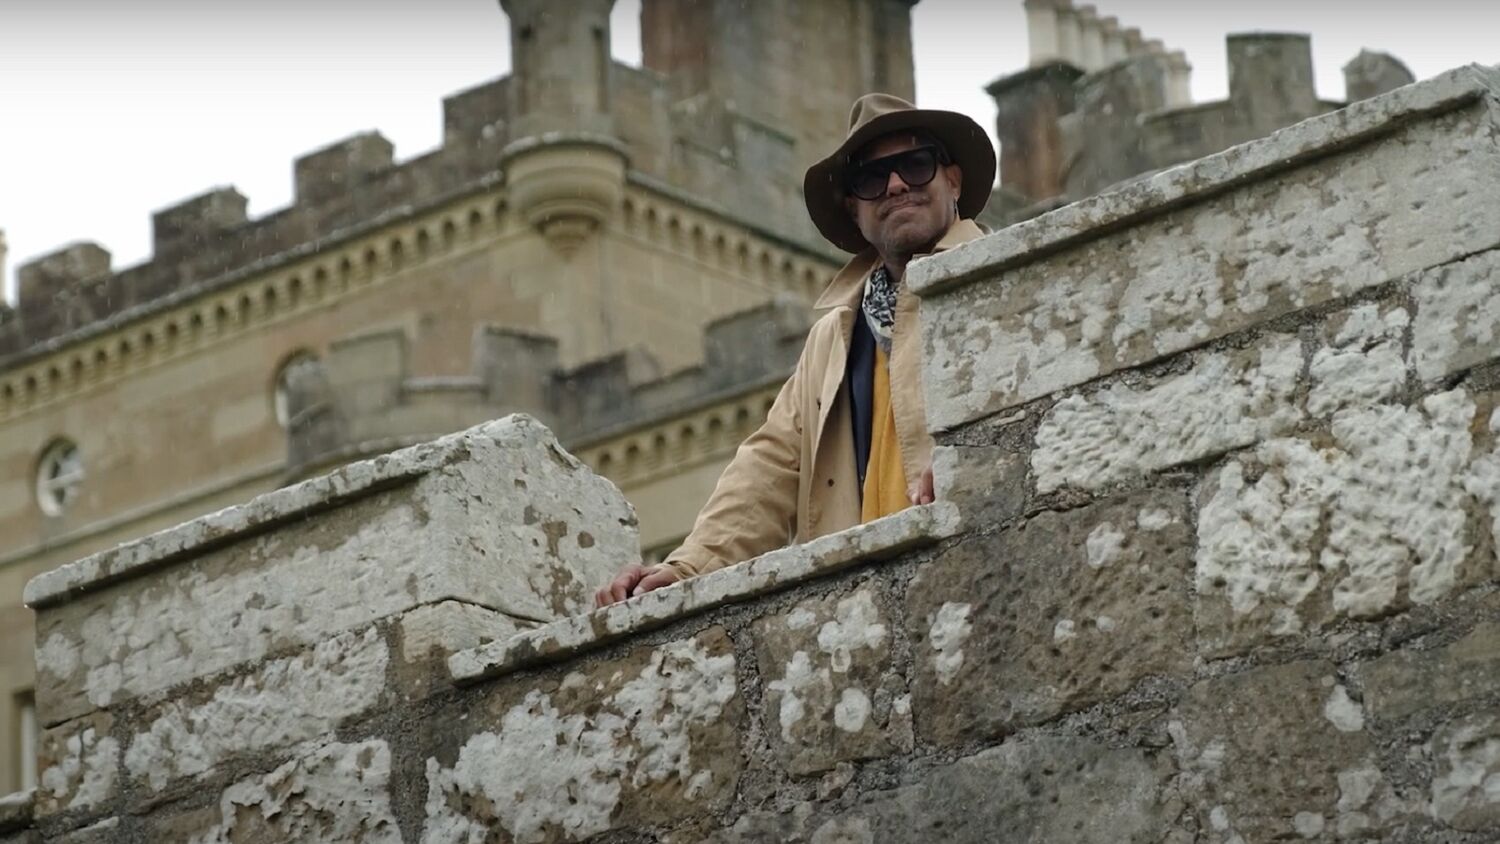 A man in a hat and sunglasses stands on the stone parapet of Culzean Castle, looking out across the grounds.